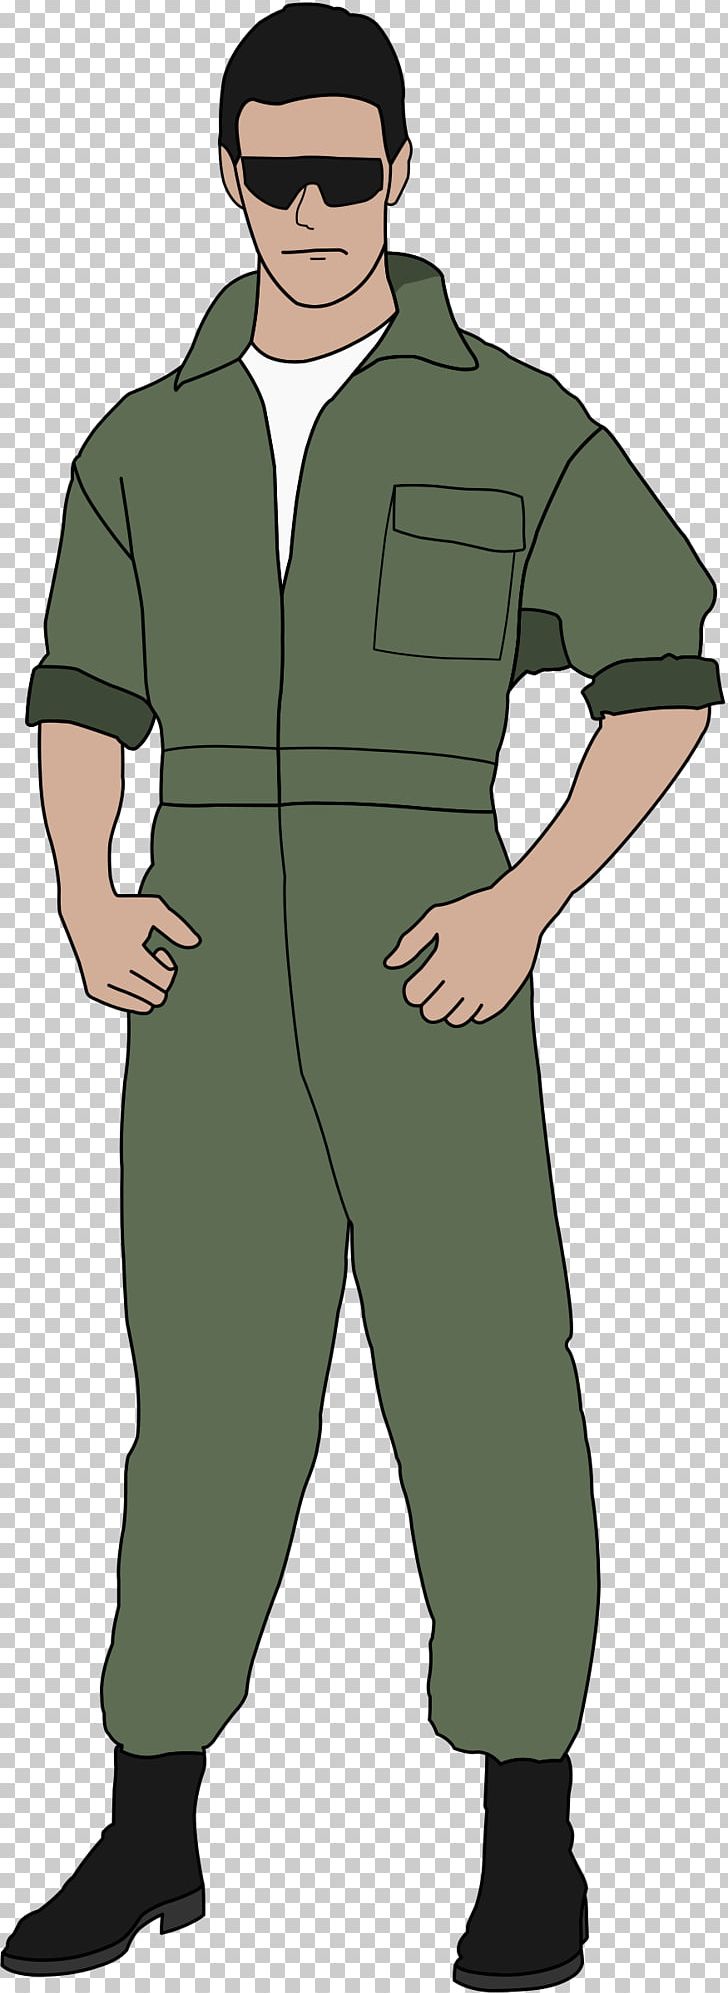 Airplane 0506147919 Jumpsuit Costume Fighter Pilot PNG, Clipart, Airplane, Costume Party, Fashion, Fictional Character, Fighter Aircraft Free PNG Download